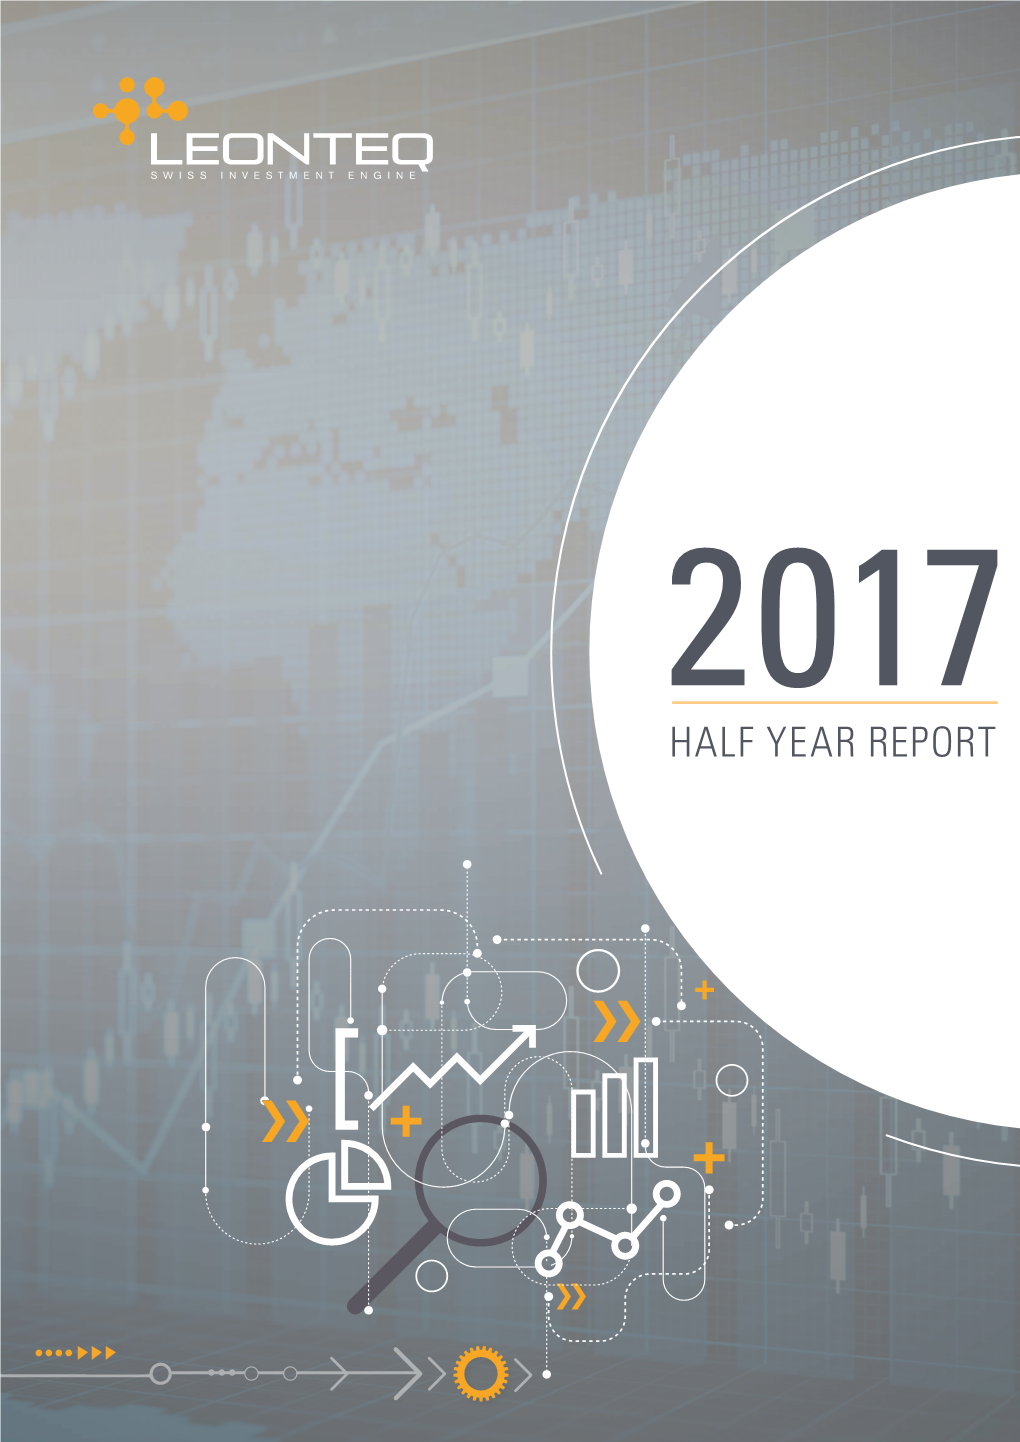 Half Year Report 10 Locations Worldwide in 9 Countries